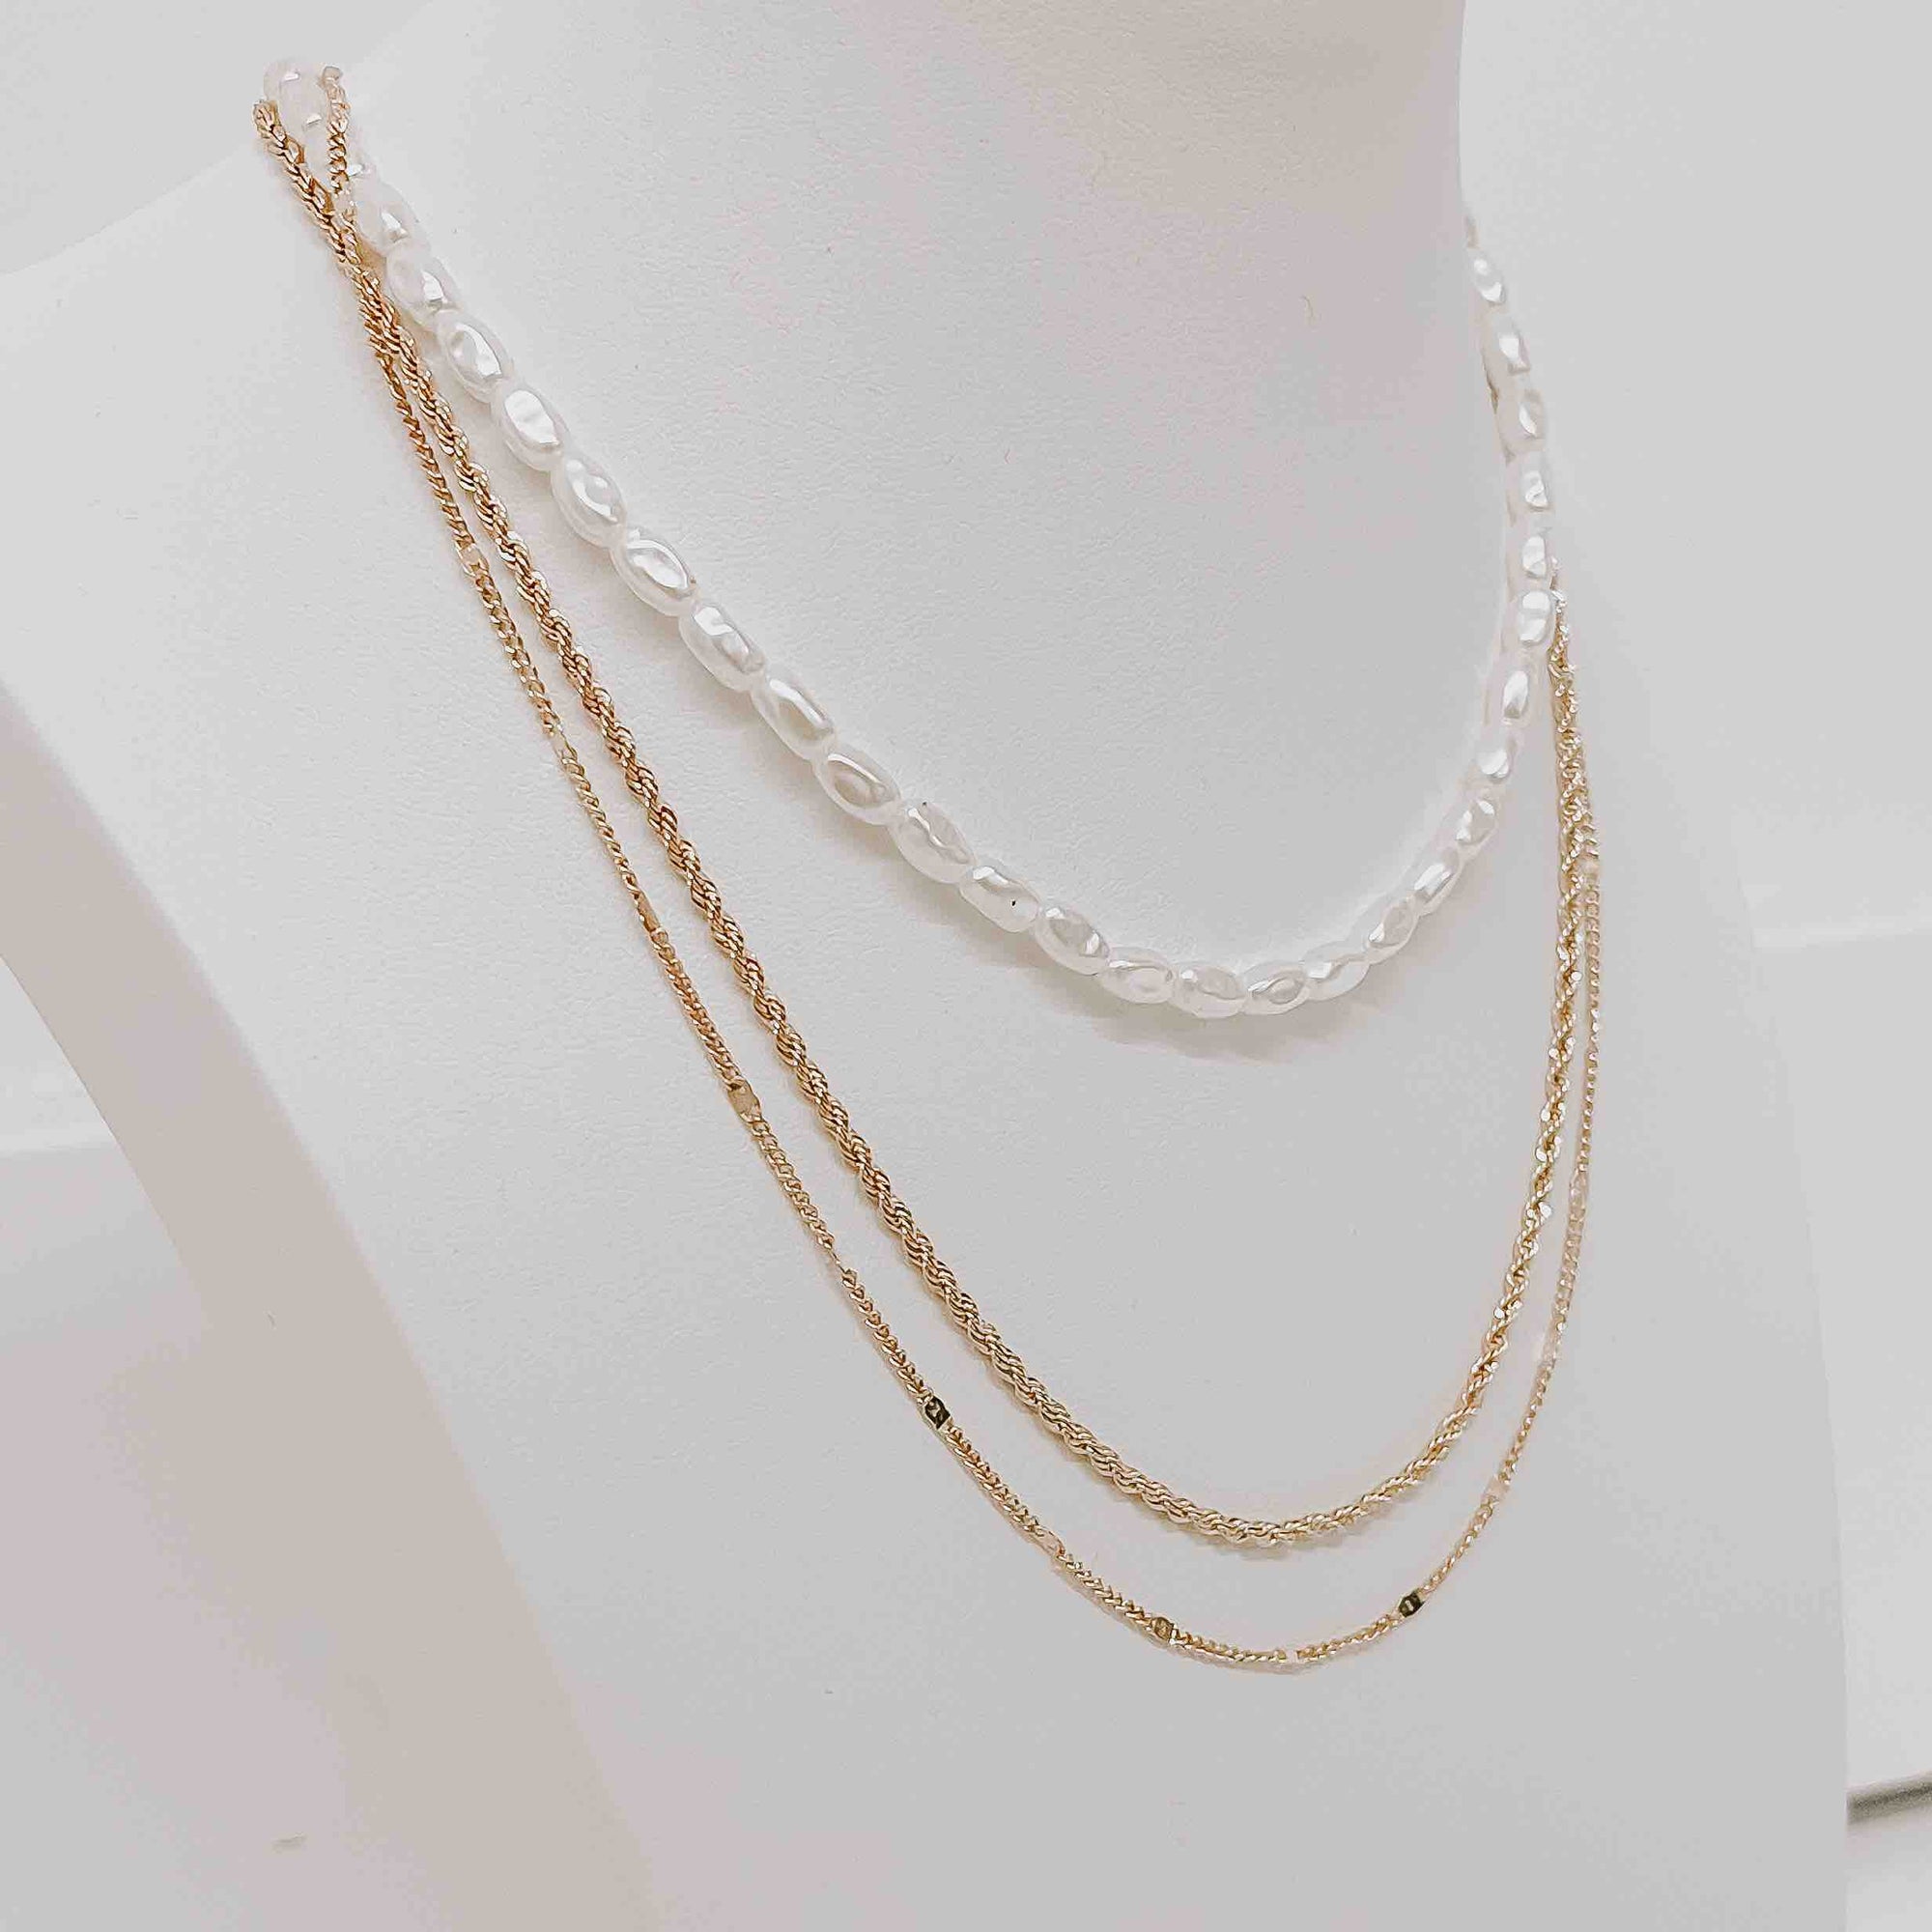 Oh My Pearl Layered Chain Necklace - 2 gold chains and 1 pearl chain